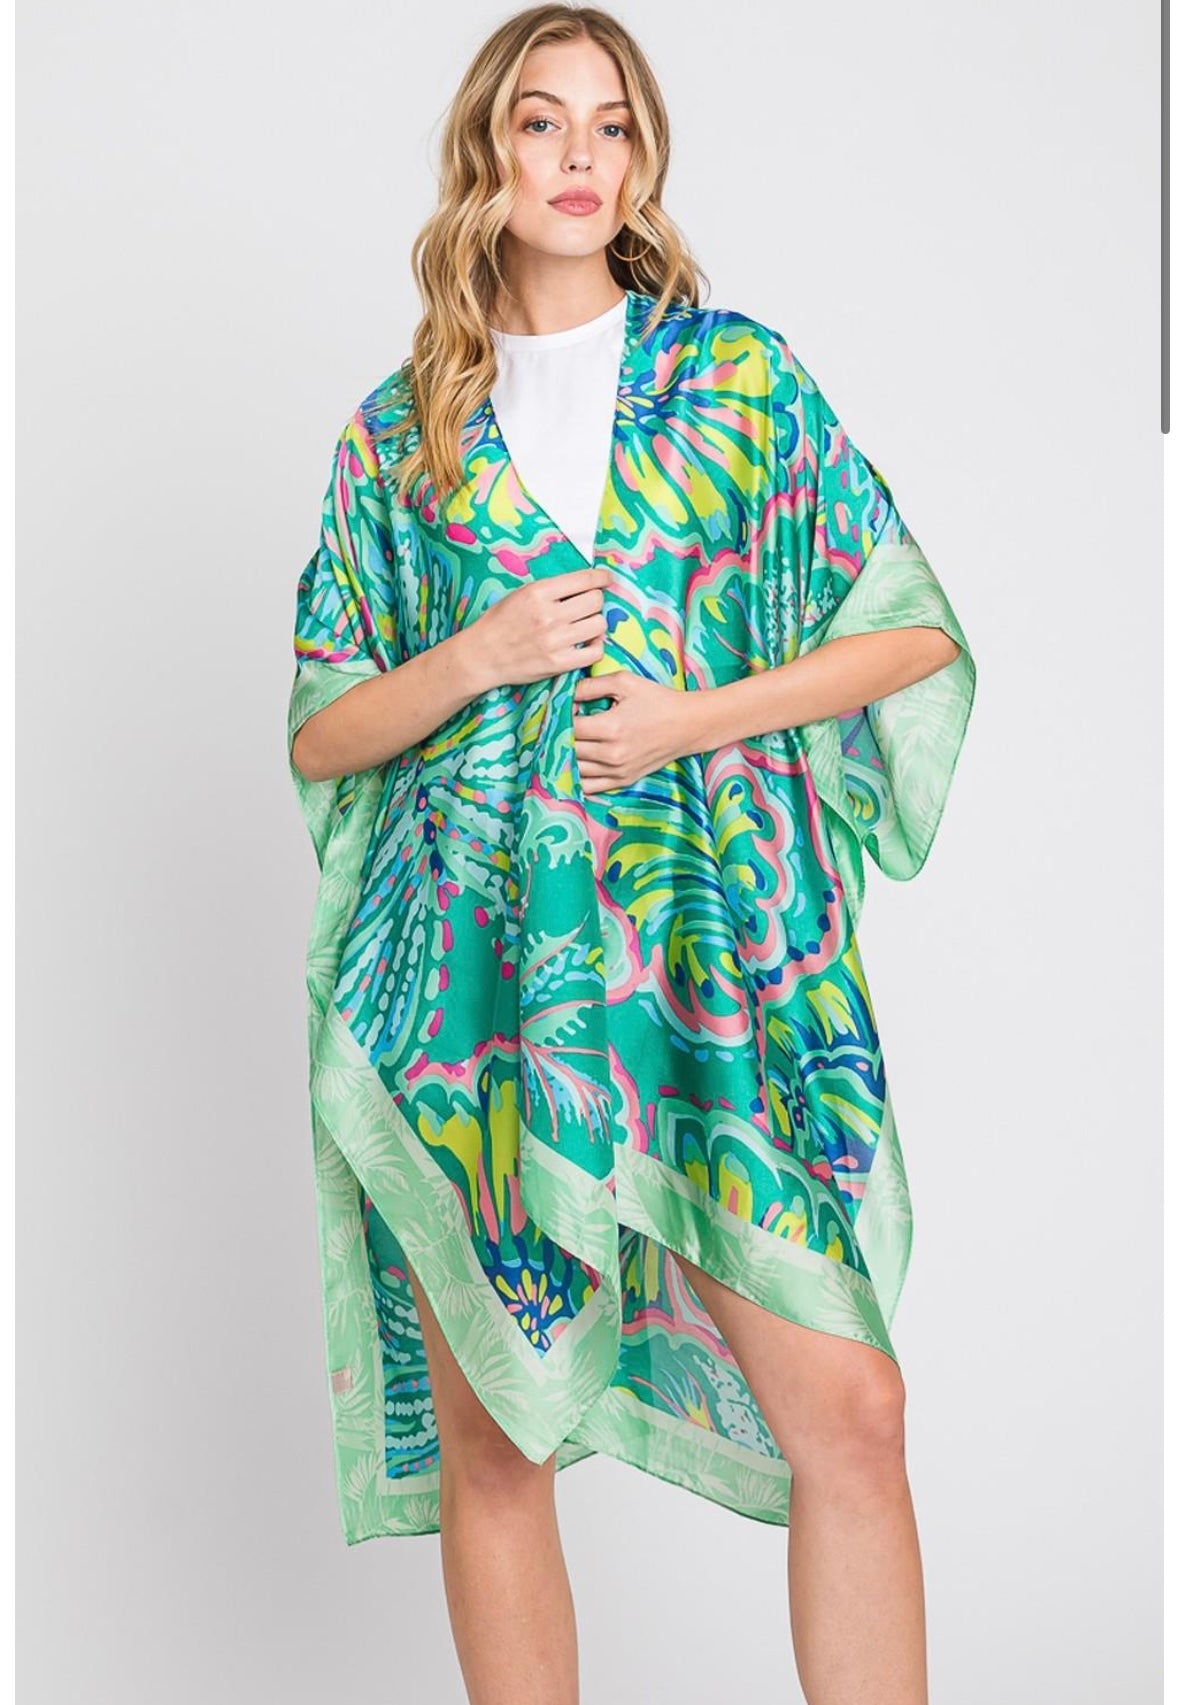 Cute lightweight cover up for summer